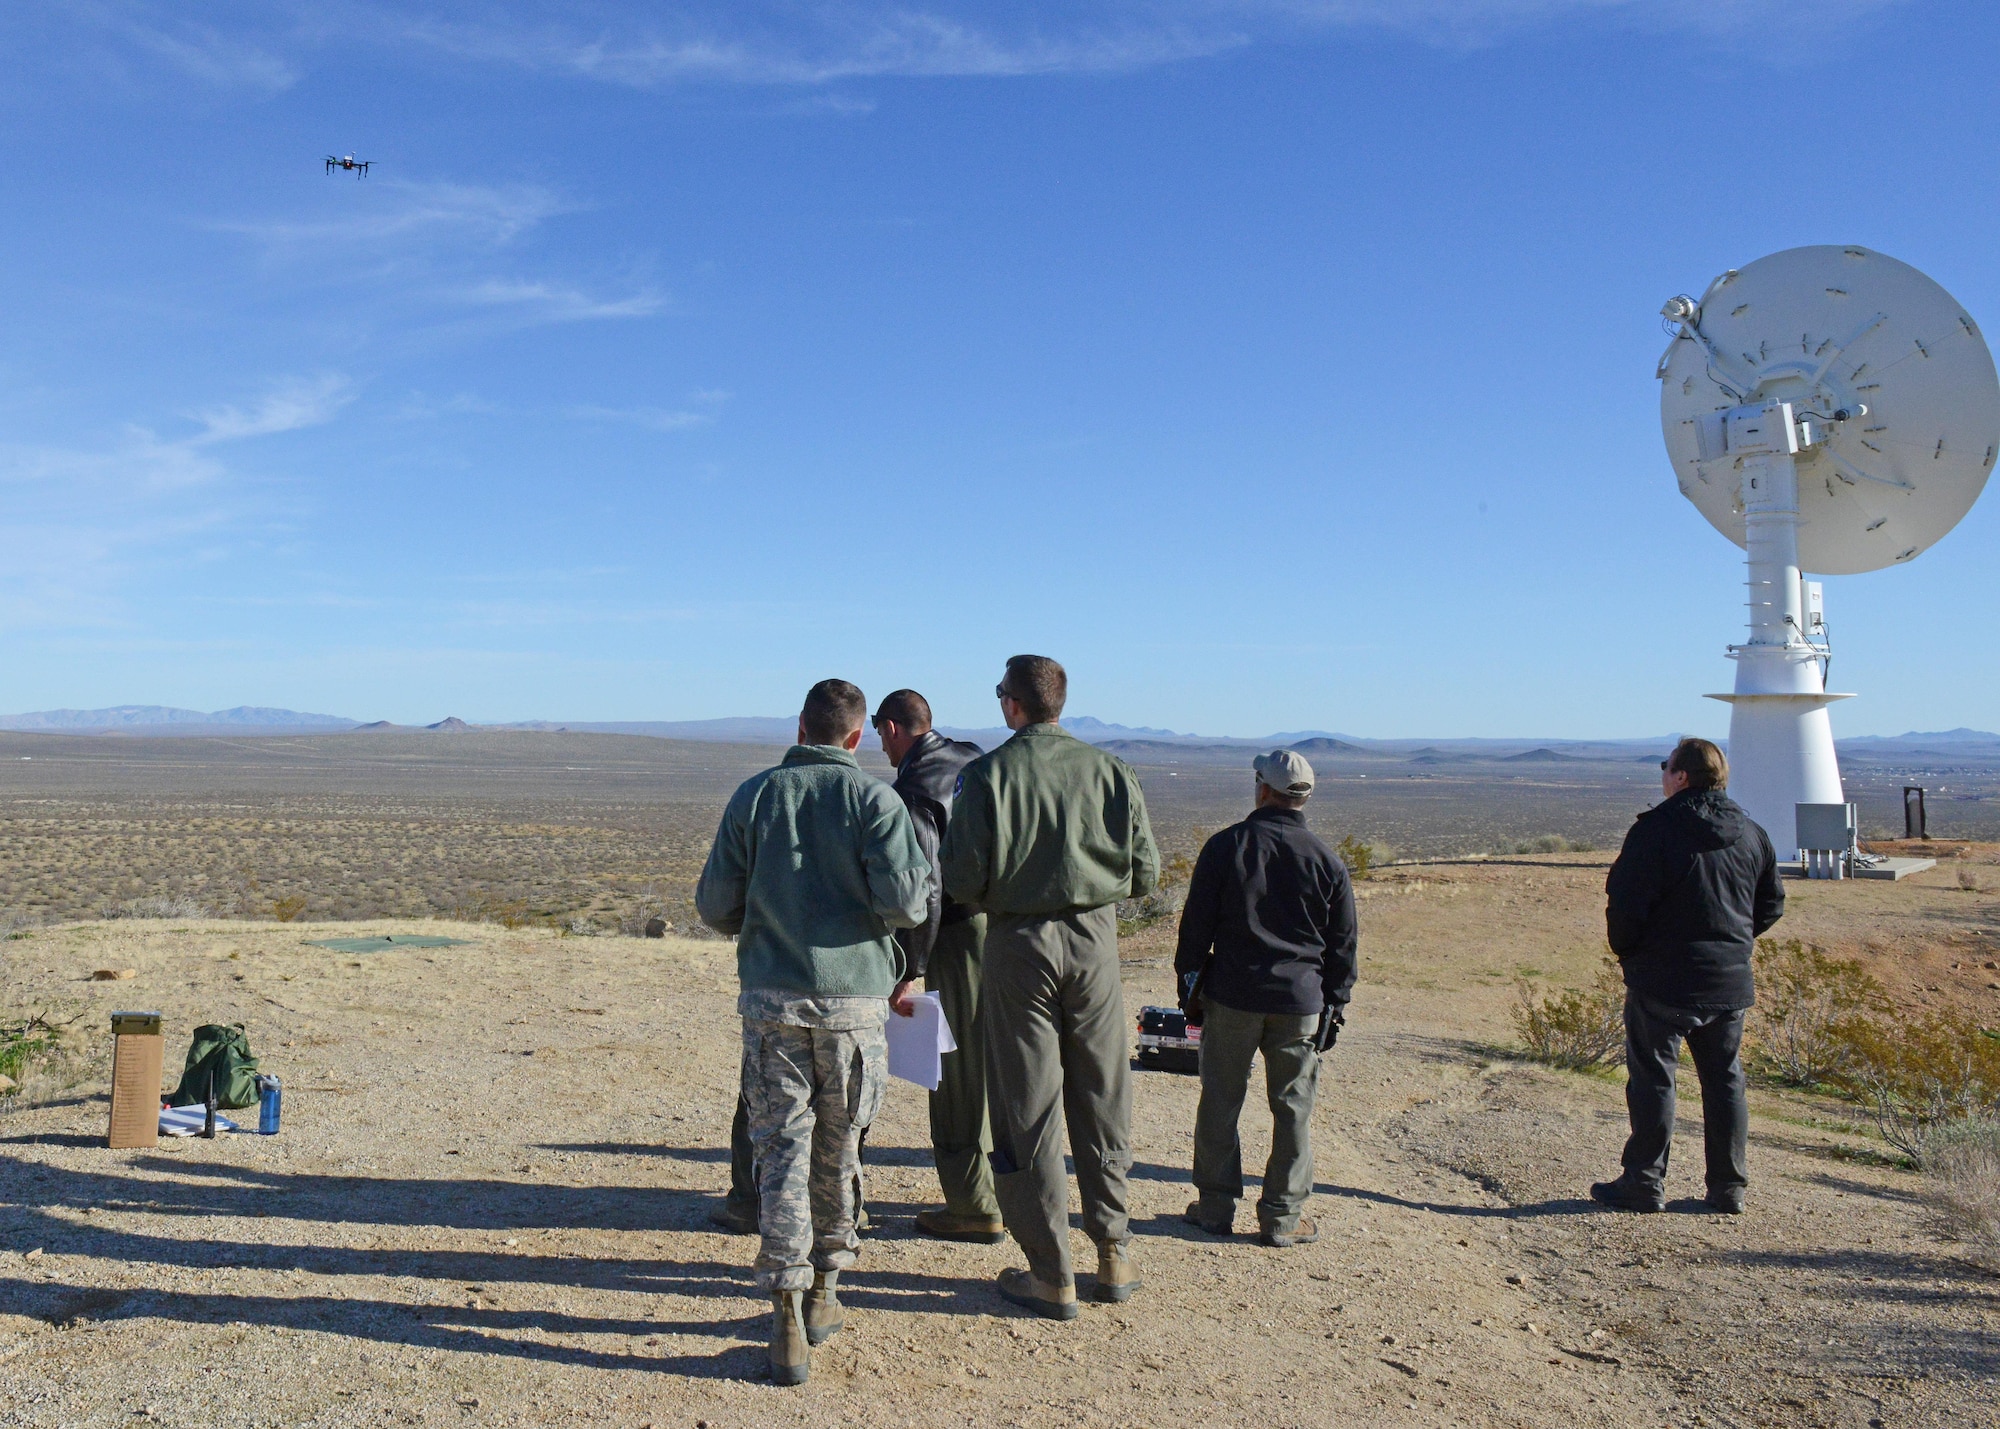 Members of the Emerging Technologies Combined Test Force conducted the first test for the CTF Feb. 13. The test was conducted for the 412th Range Squadron, which came up with the idea of using a small unmanned aerial system to calibrate telemetry antennas (right). (U.S. Air Force photo by Kenji Thuloweit)